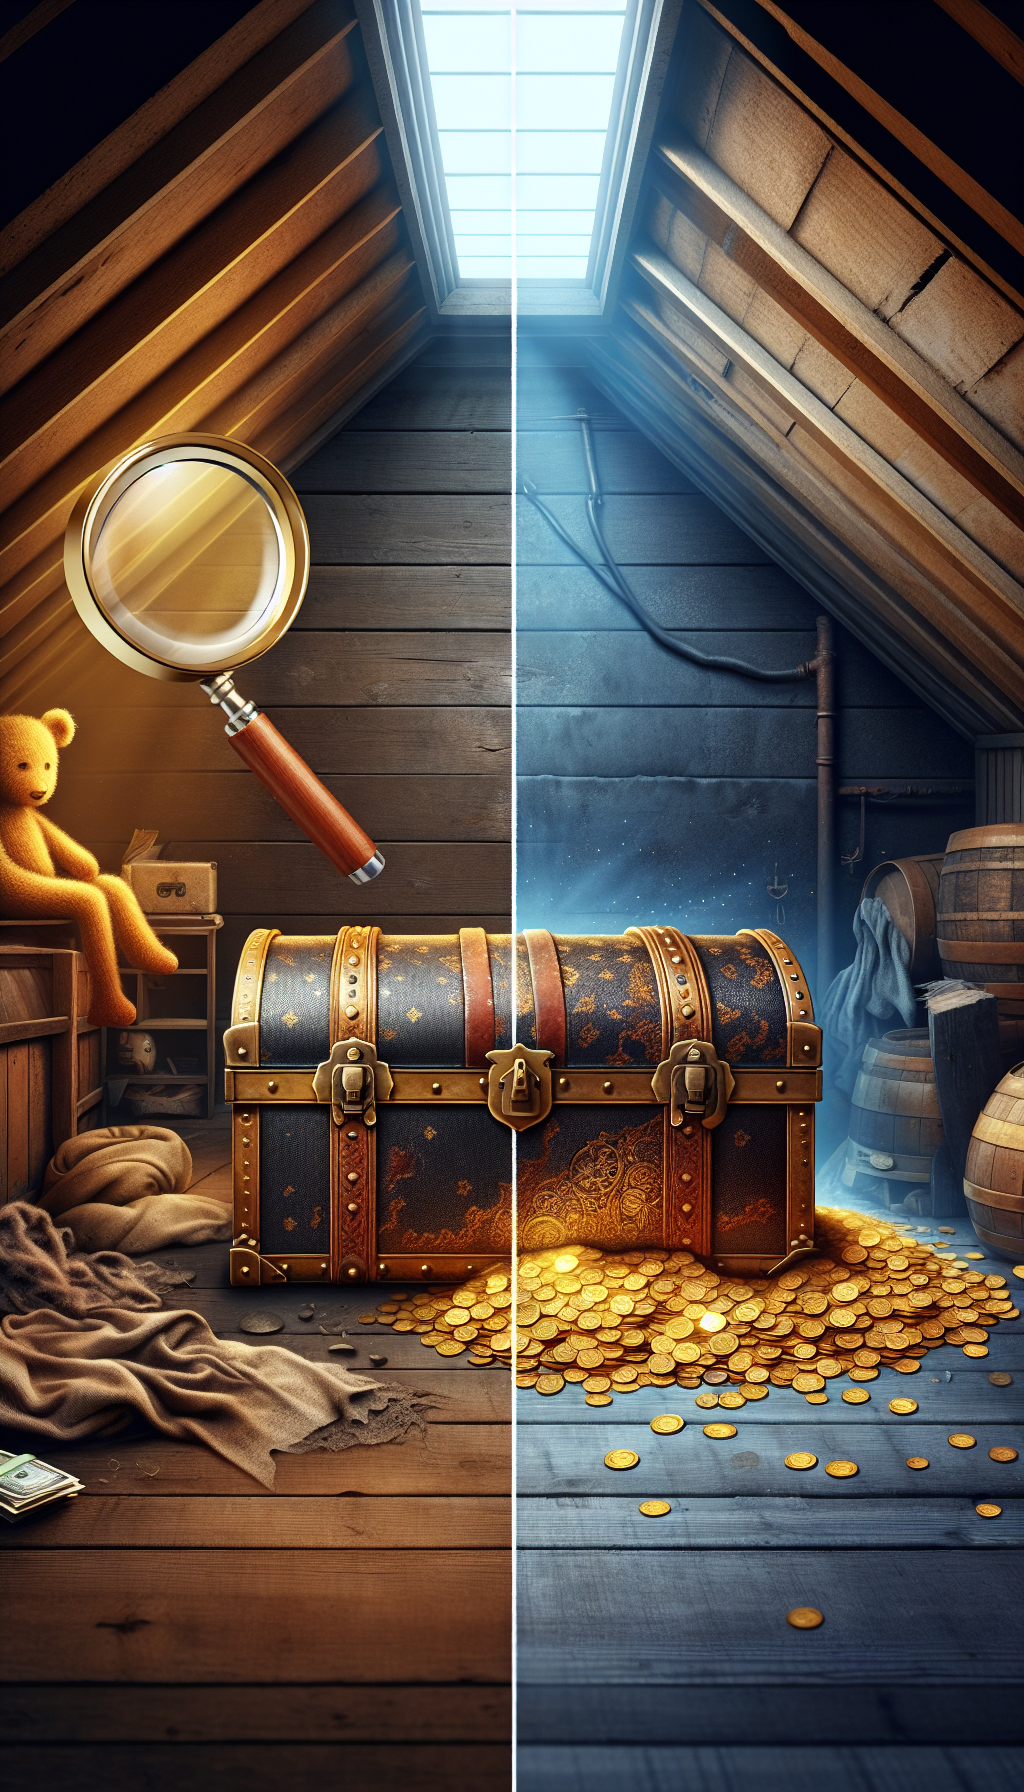 A split-screen illustration: On the left, a rust-covered, neglected antique trunk sits in a dim attic; on the right, the same trunk is restored, gleaming with rich patina, positioned in a luxurious setting, with golden coins spilling out. A magnifying glass hovers between the scenes, focusing on key value factors like pristine hardware and intact leather straps.